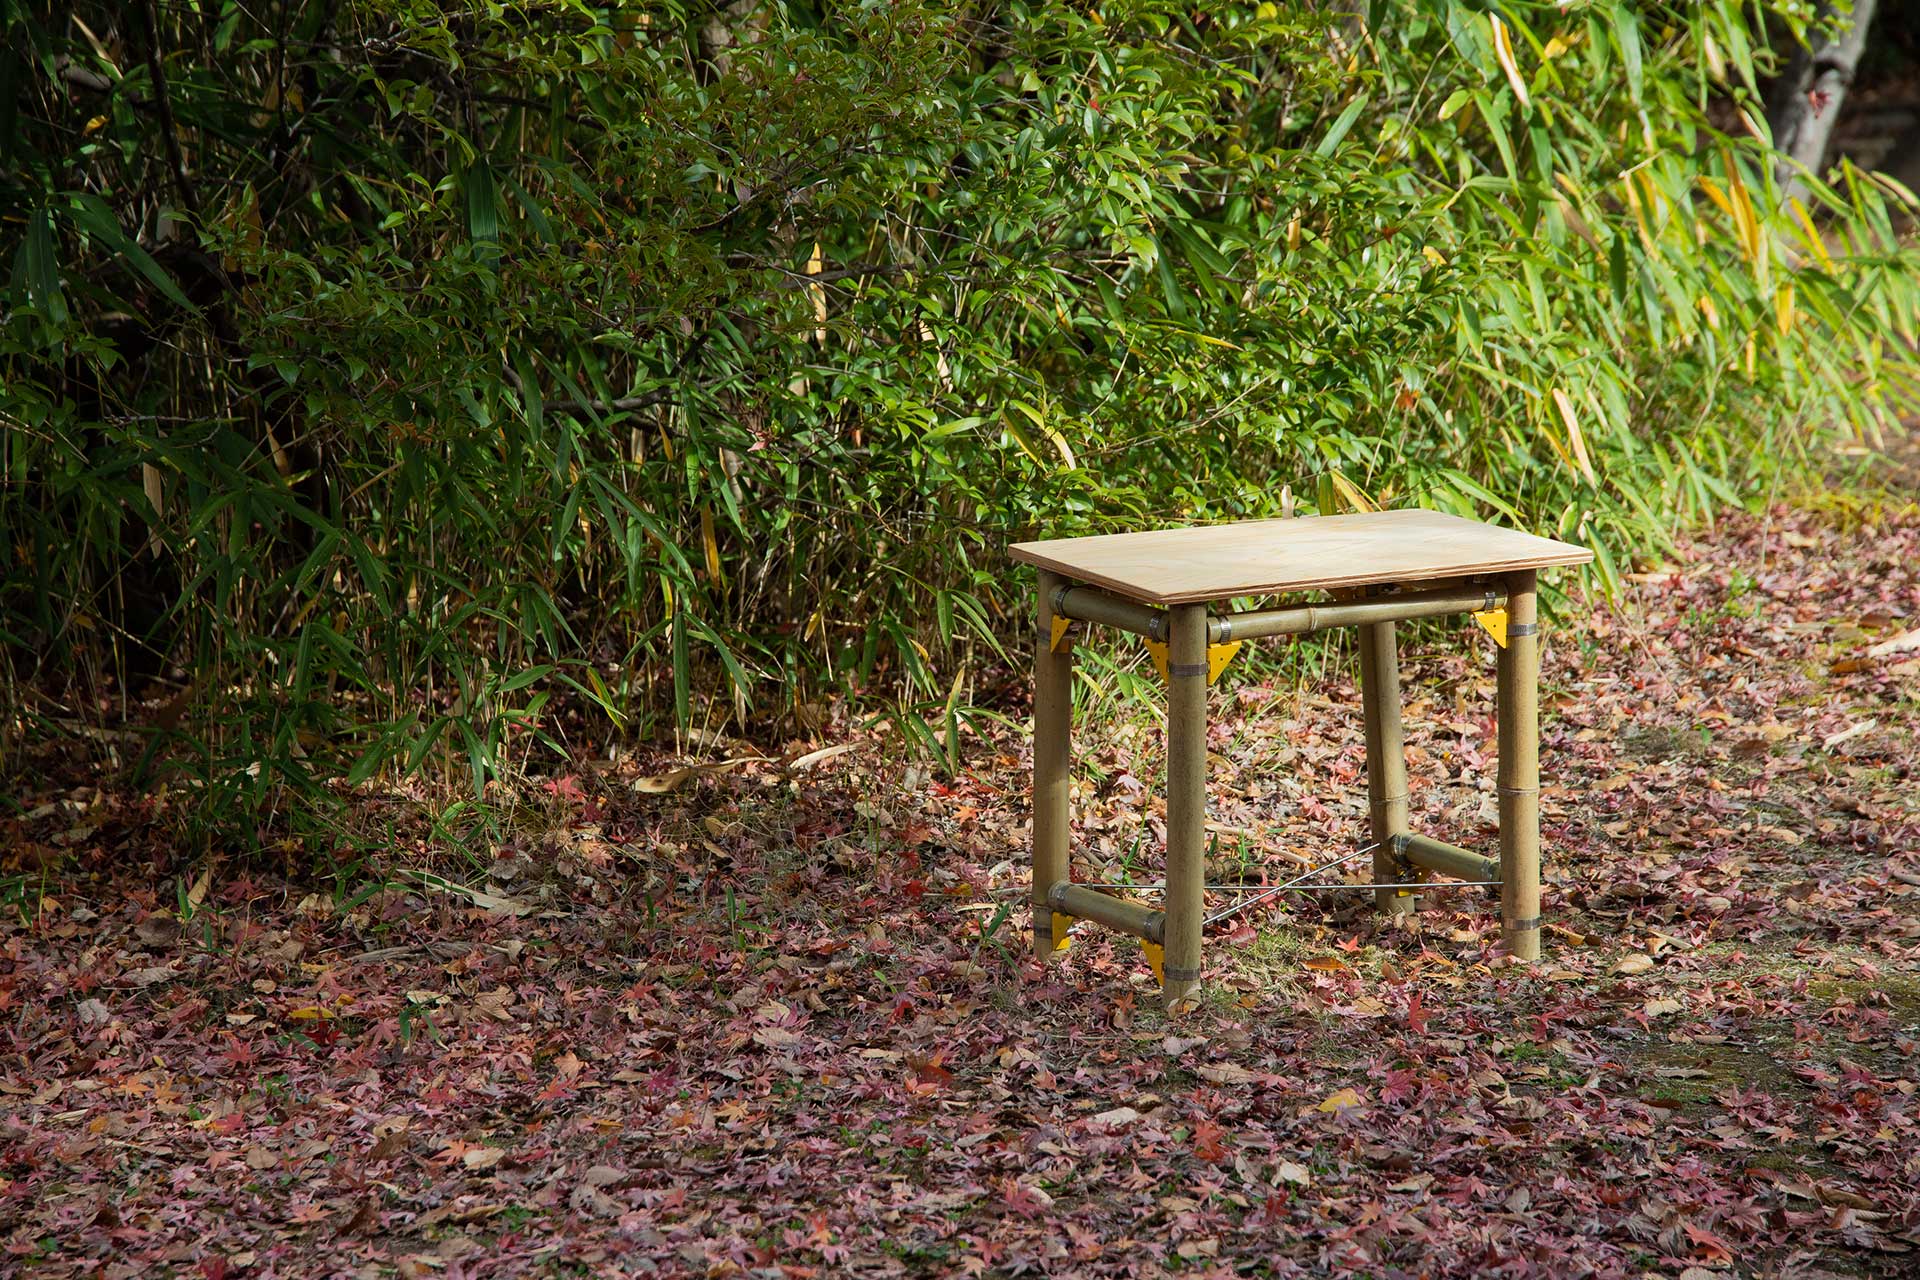 Developing Versatile Joints for the Easy Creation of Furniture and Buildings Using Bamboo